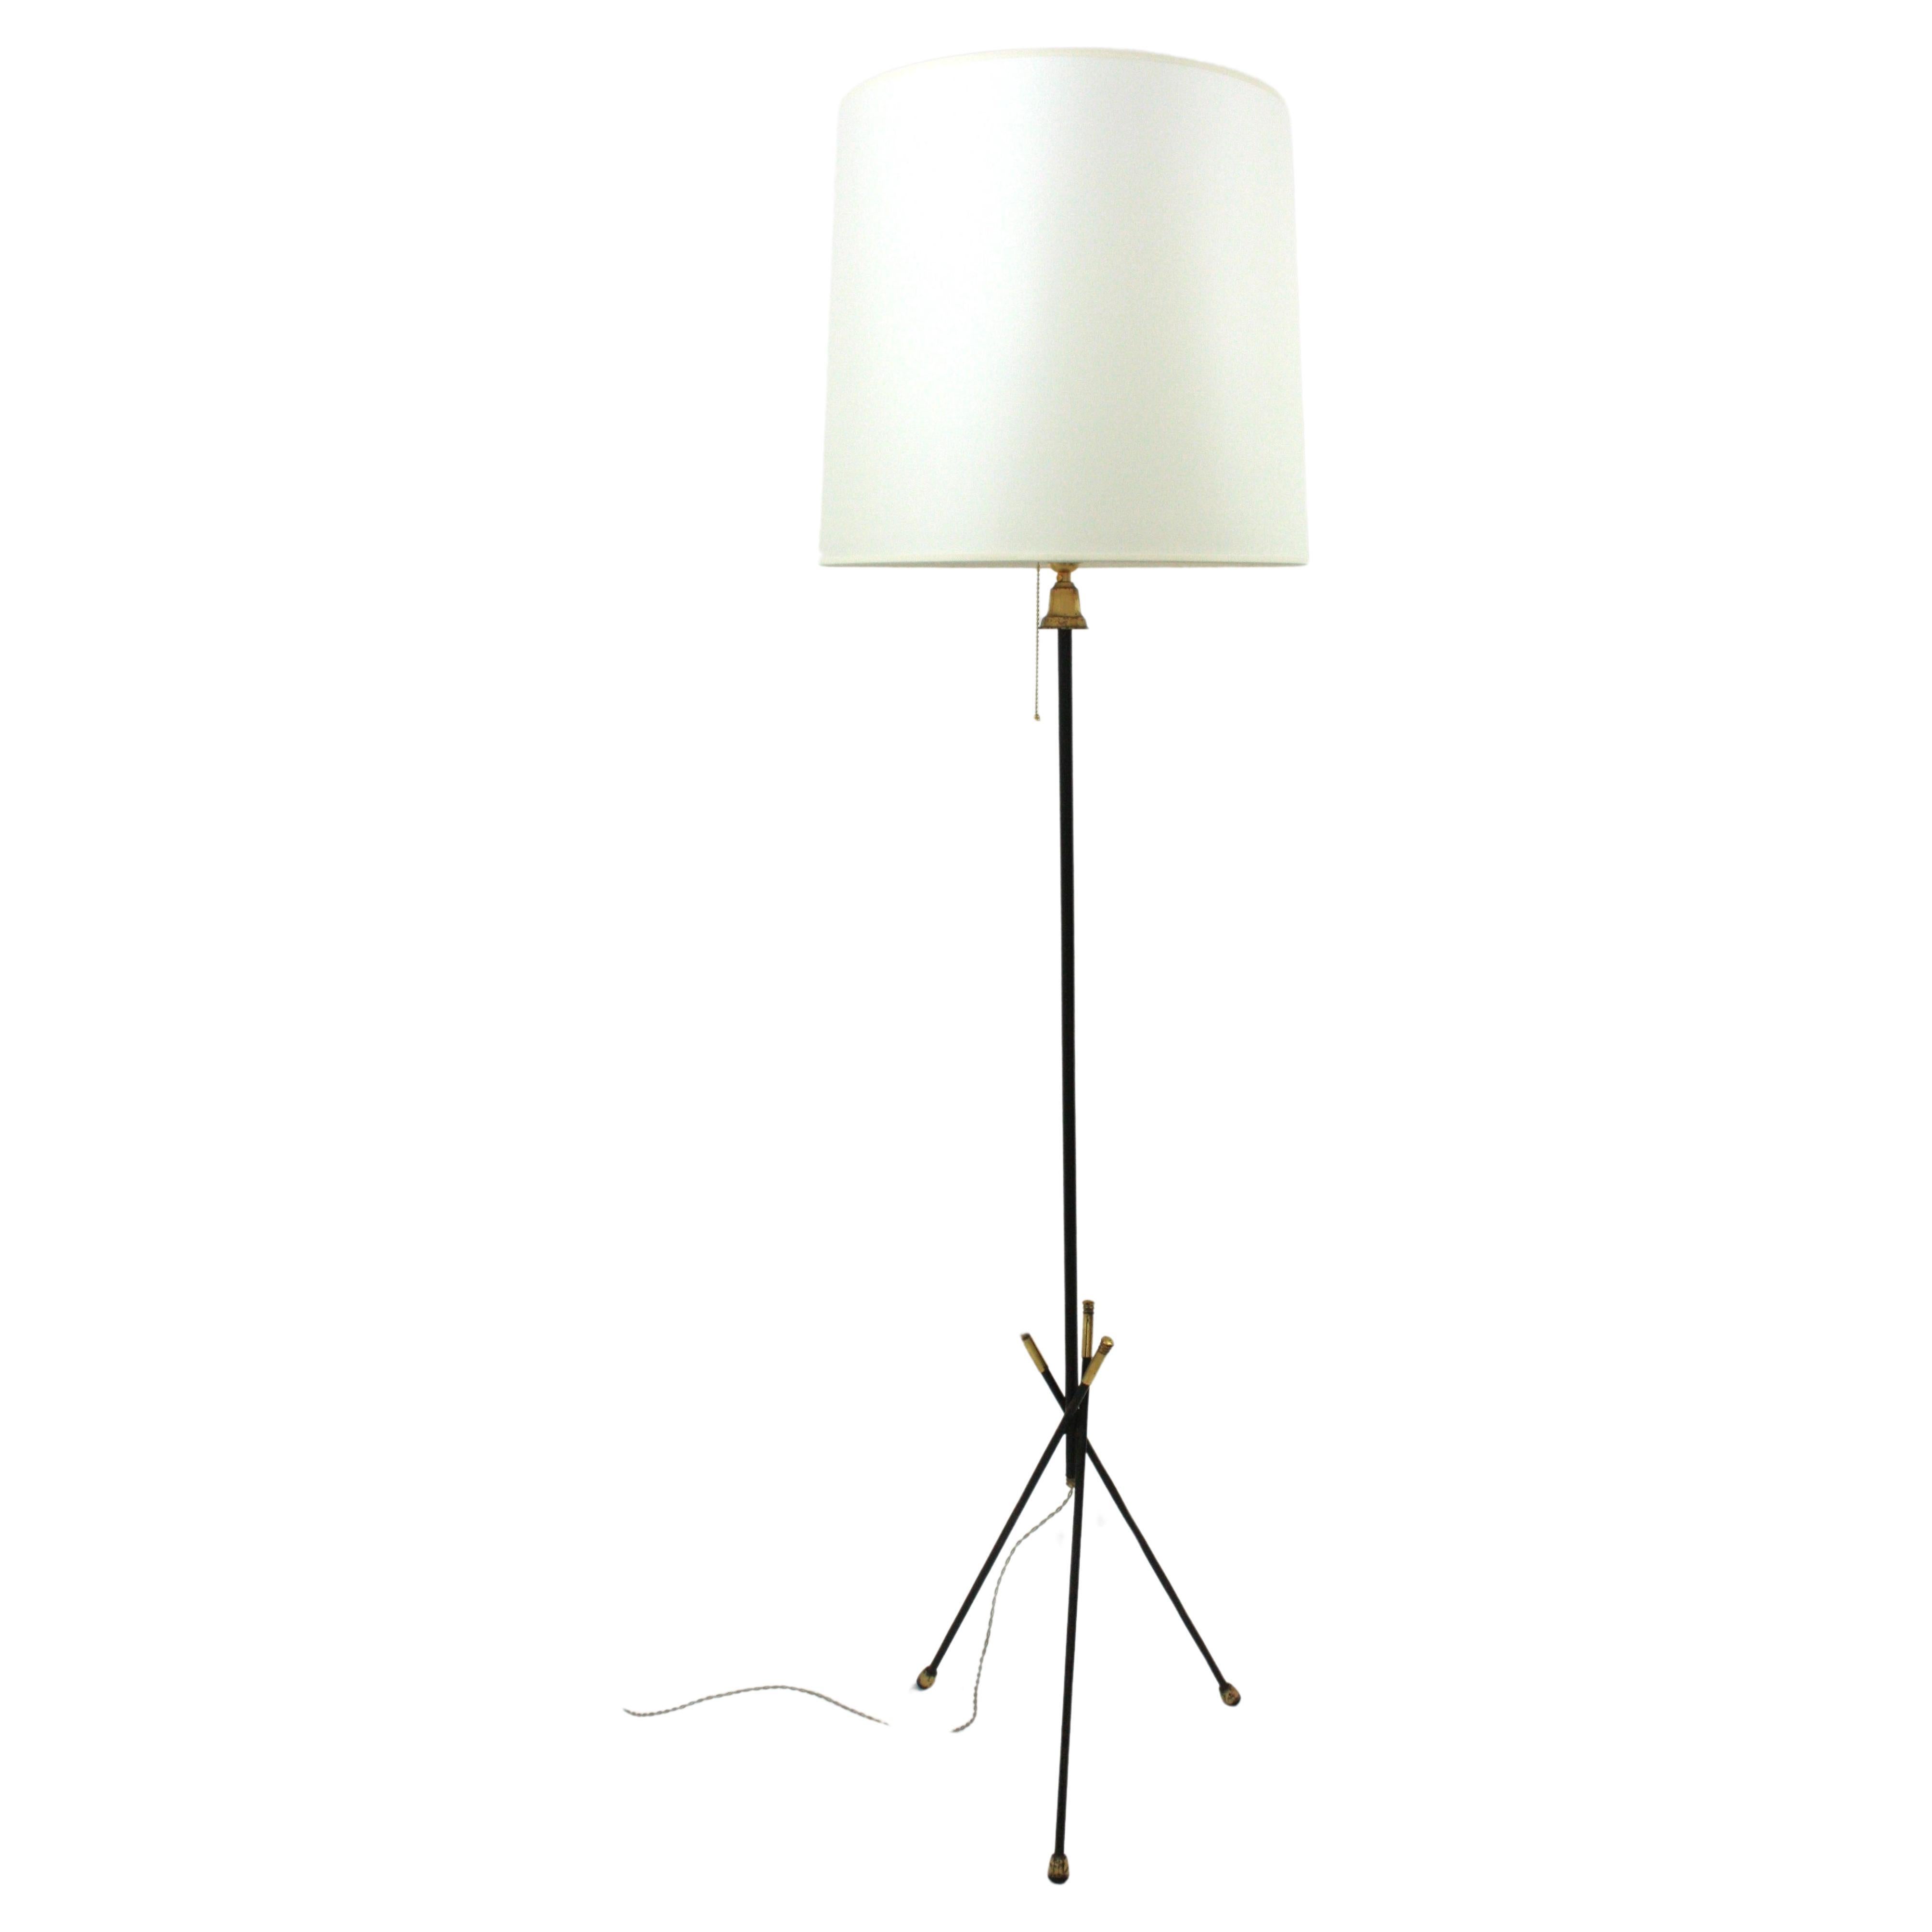 French Mid-Century Modern Tripod Floor Lamp For Sale